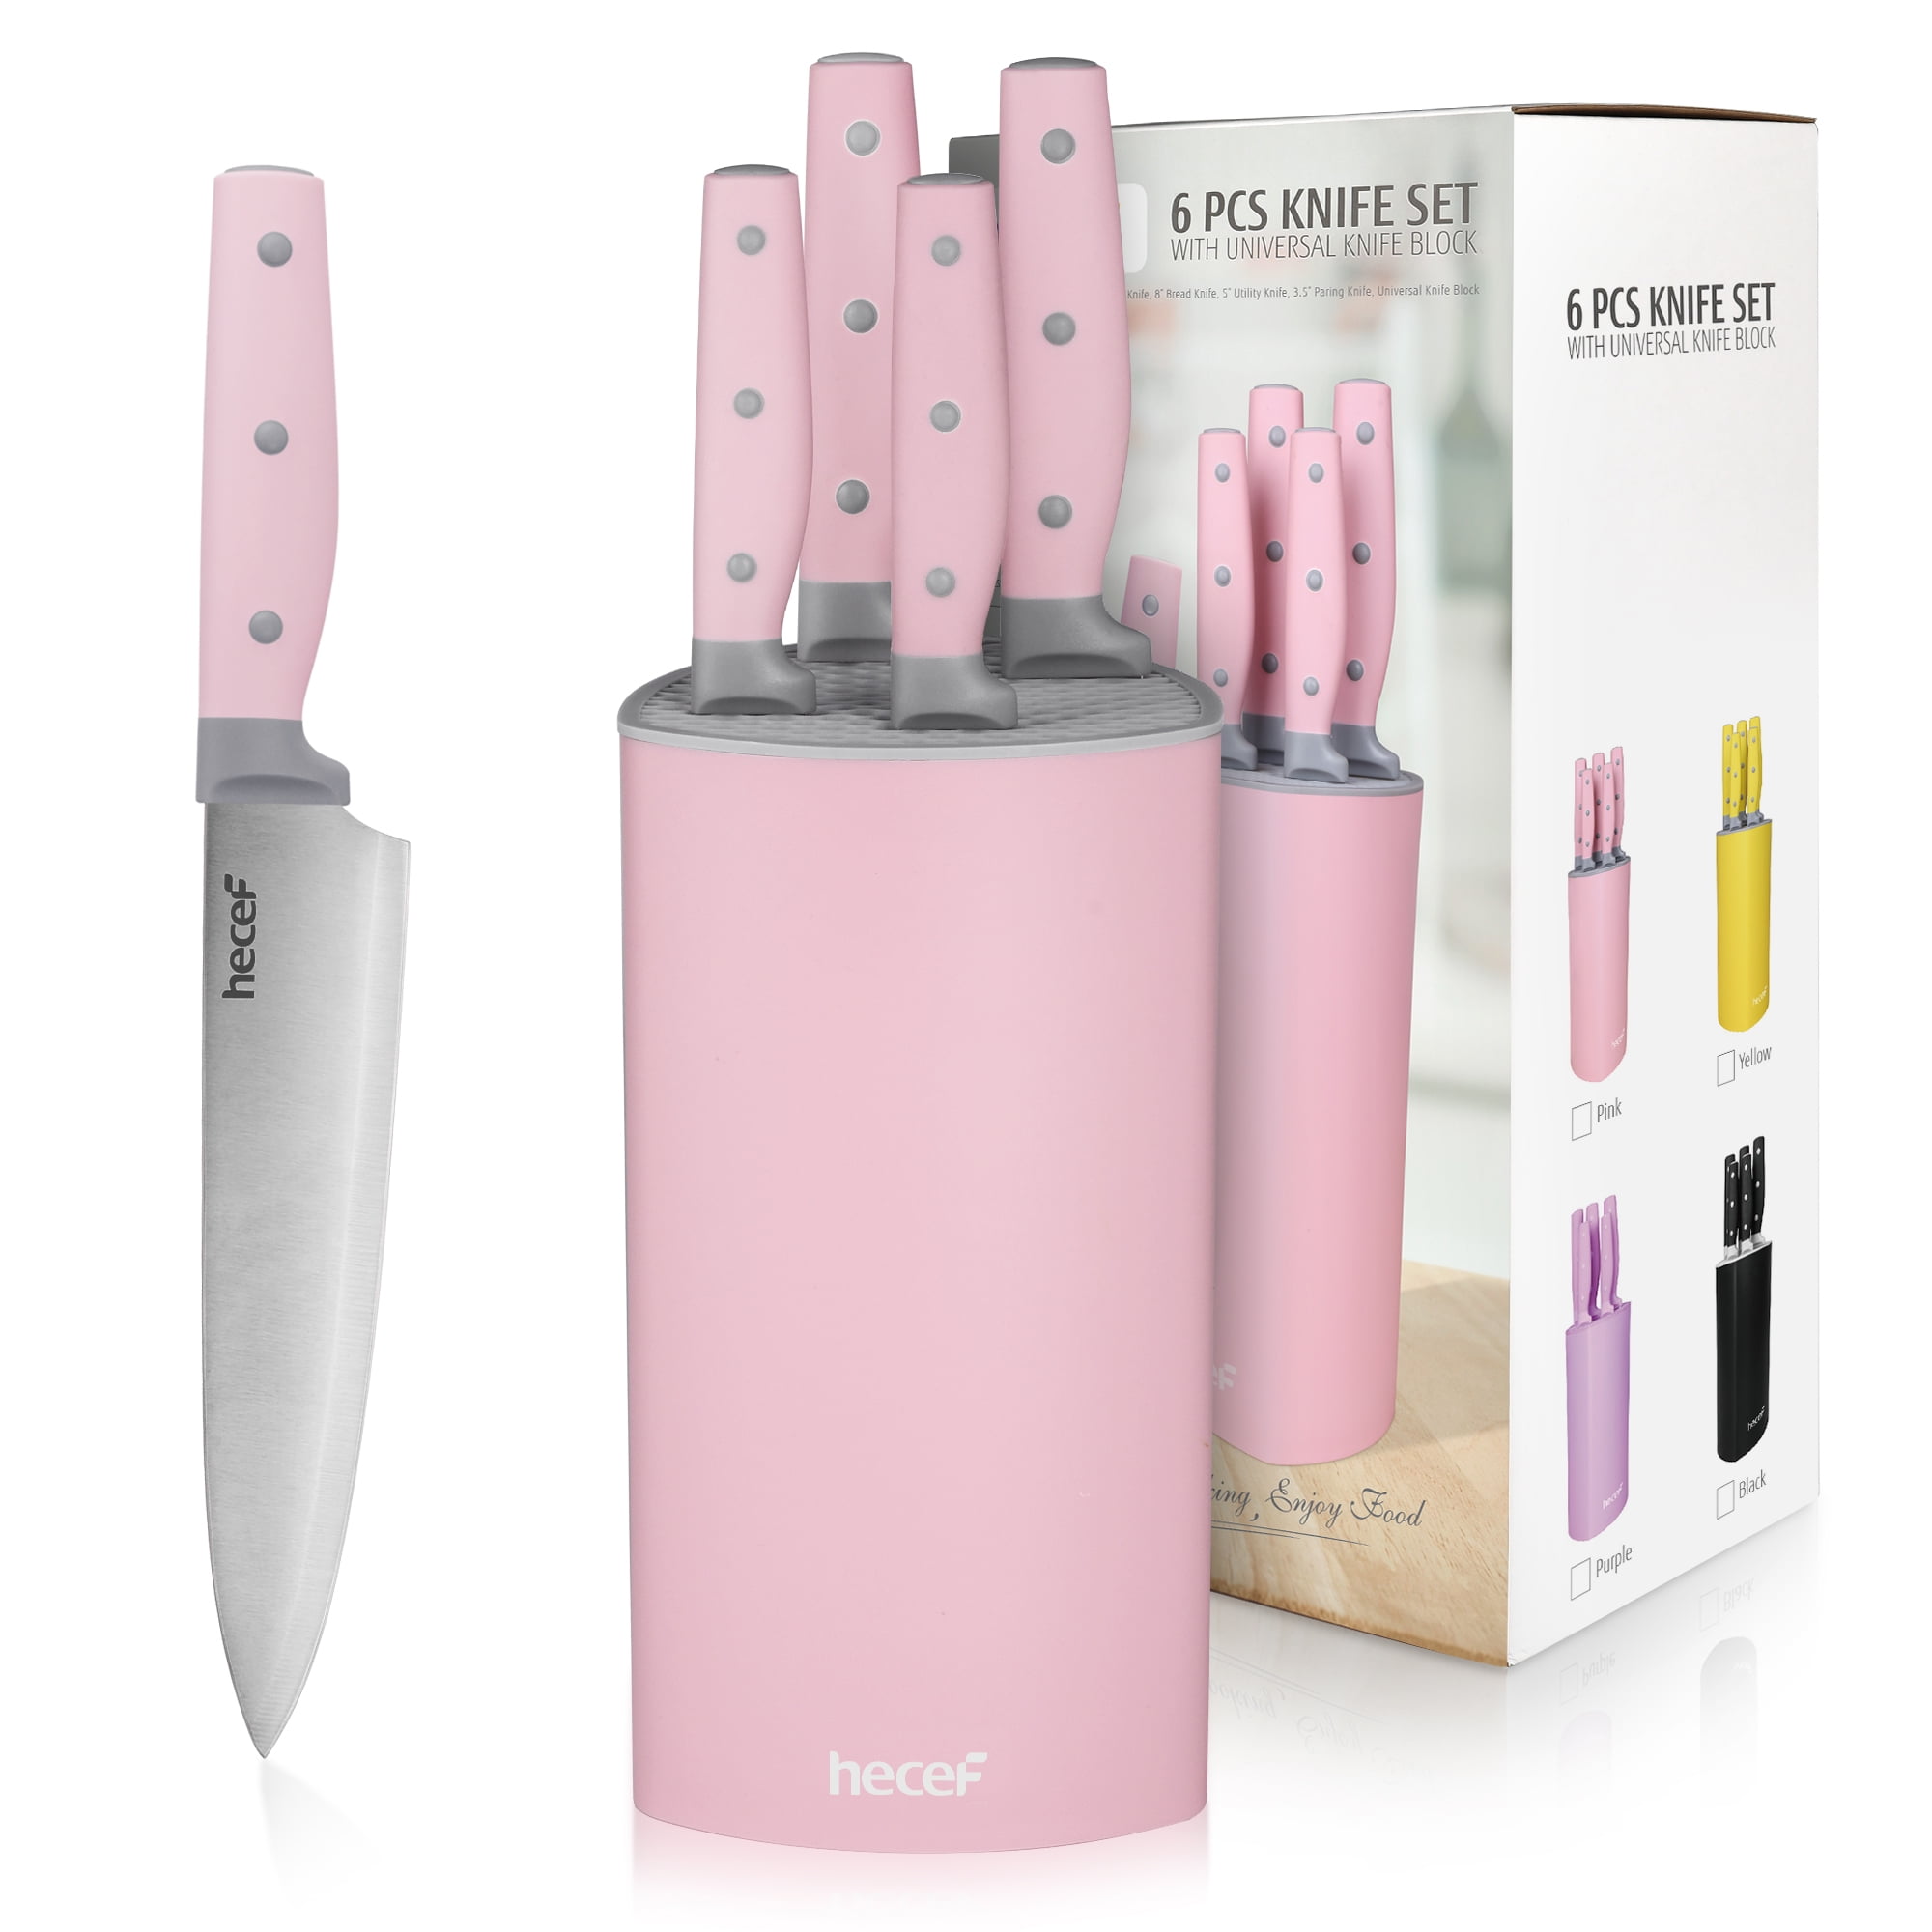 Hecef Kitchen Knife Block Set, 14pcs High Carbon Stainless Steel Cutlery Knife Set with Sharpener, Size: One size, Pink